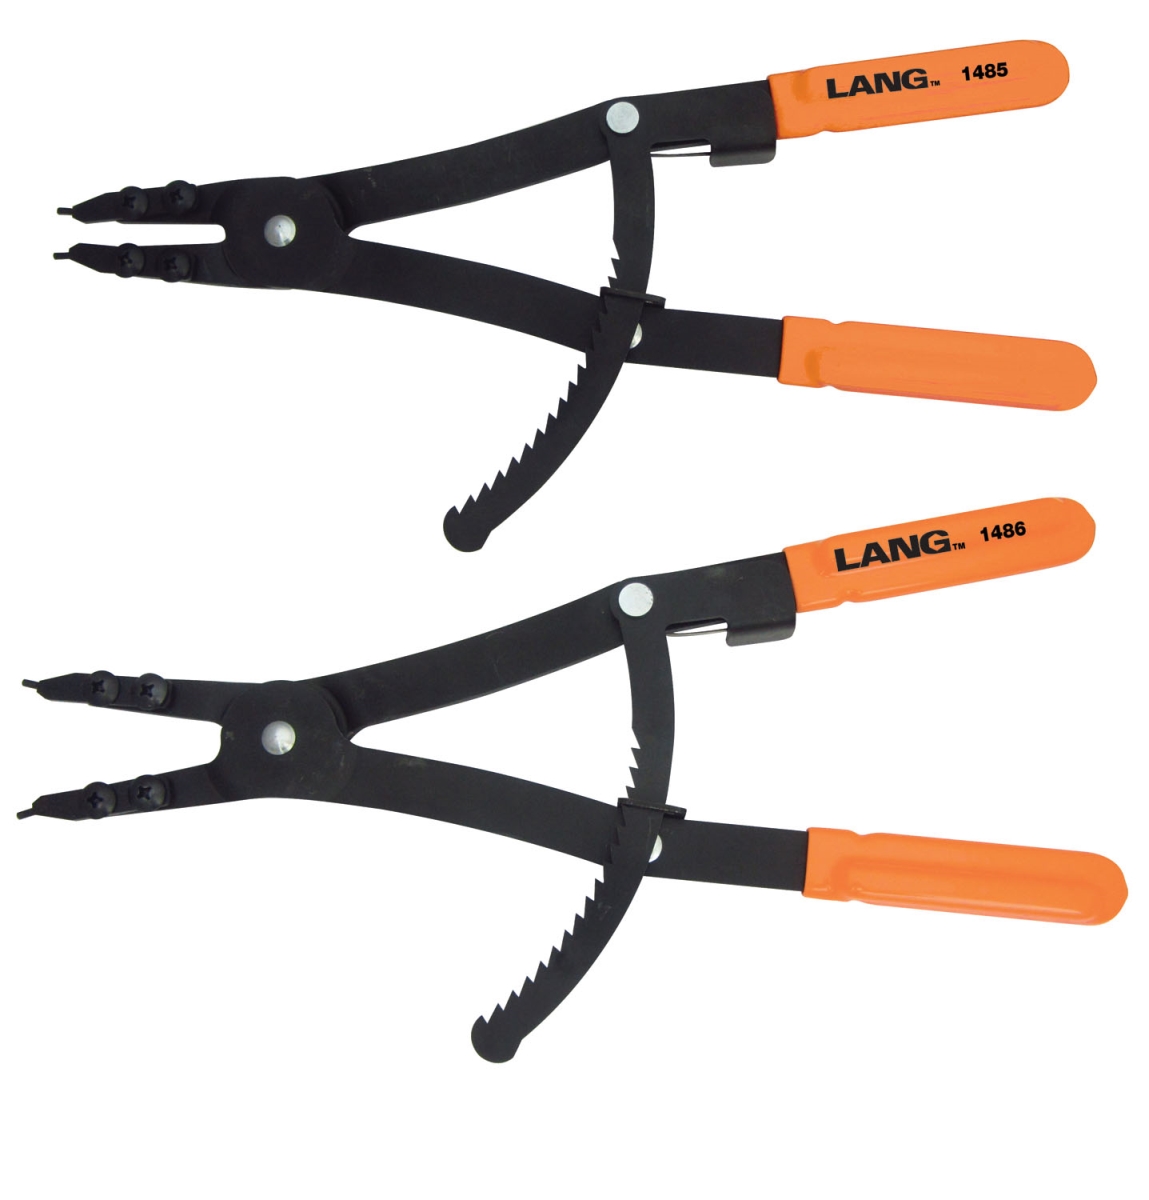 Picture of Lang 1487 16 in. 2 Piece Heavy Duty Snap Ring Pliers Set